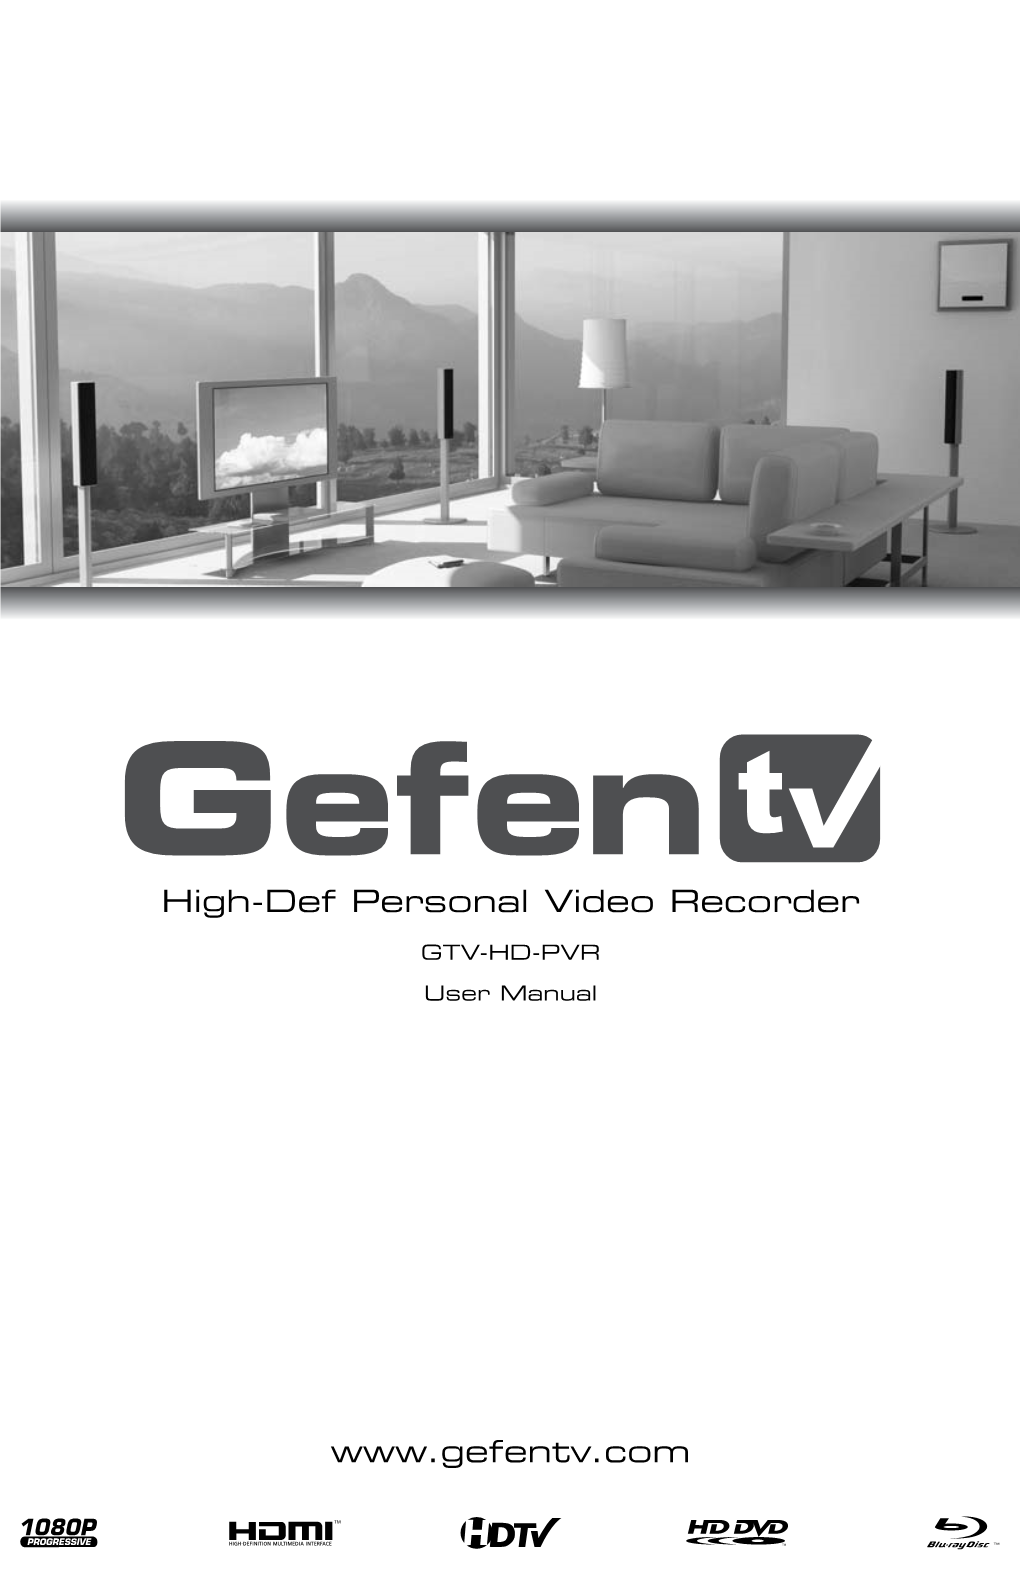 High-Def Personal Video Recorder